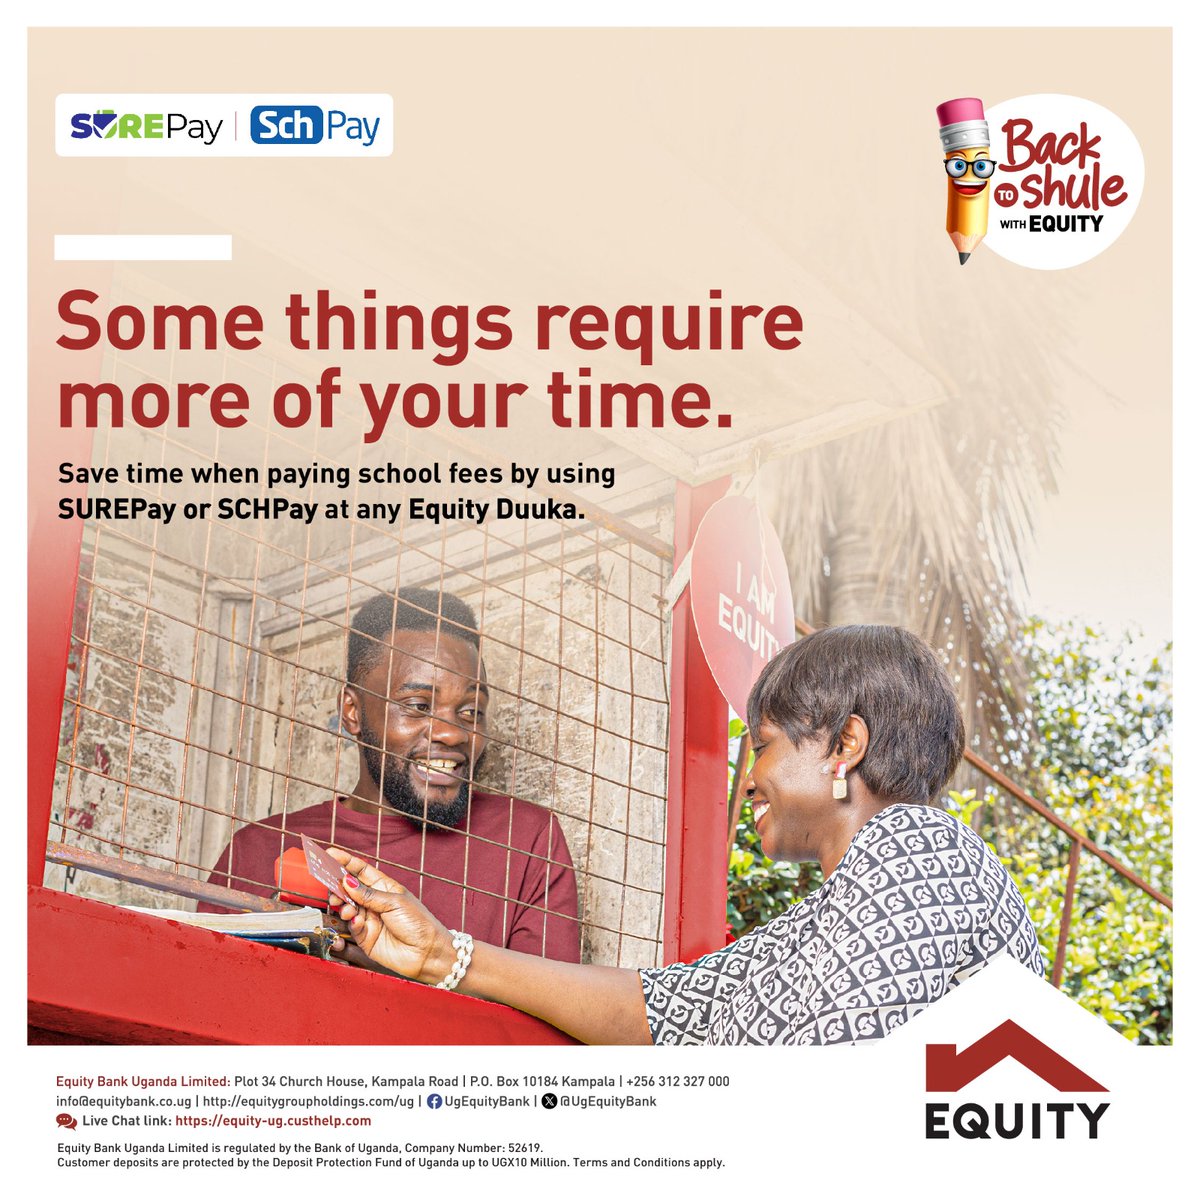 No more long queues at the Bursar's office, SUREPay / SCHPay are now the faster and easiest ways to pay your child's school fees. Simply Visit any Equity Duuka near you to access these services 🤝. #EquityBankUganda #BackToShuleWithEquity